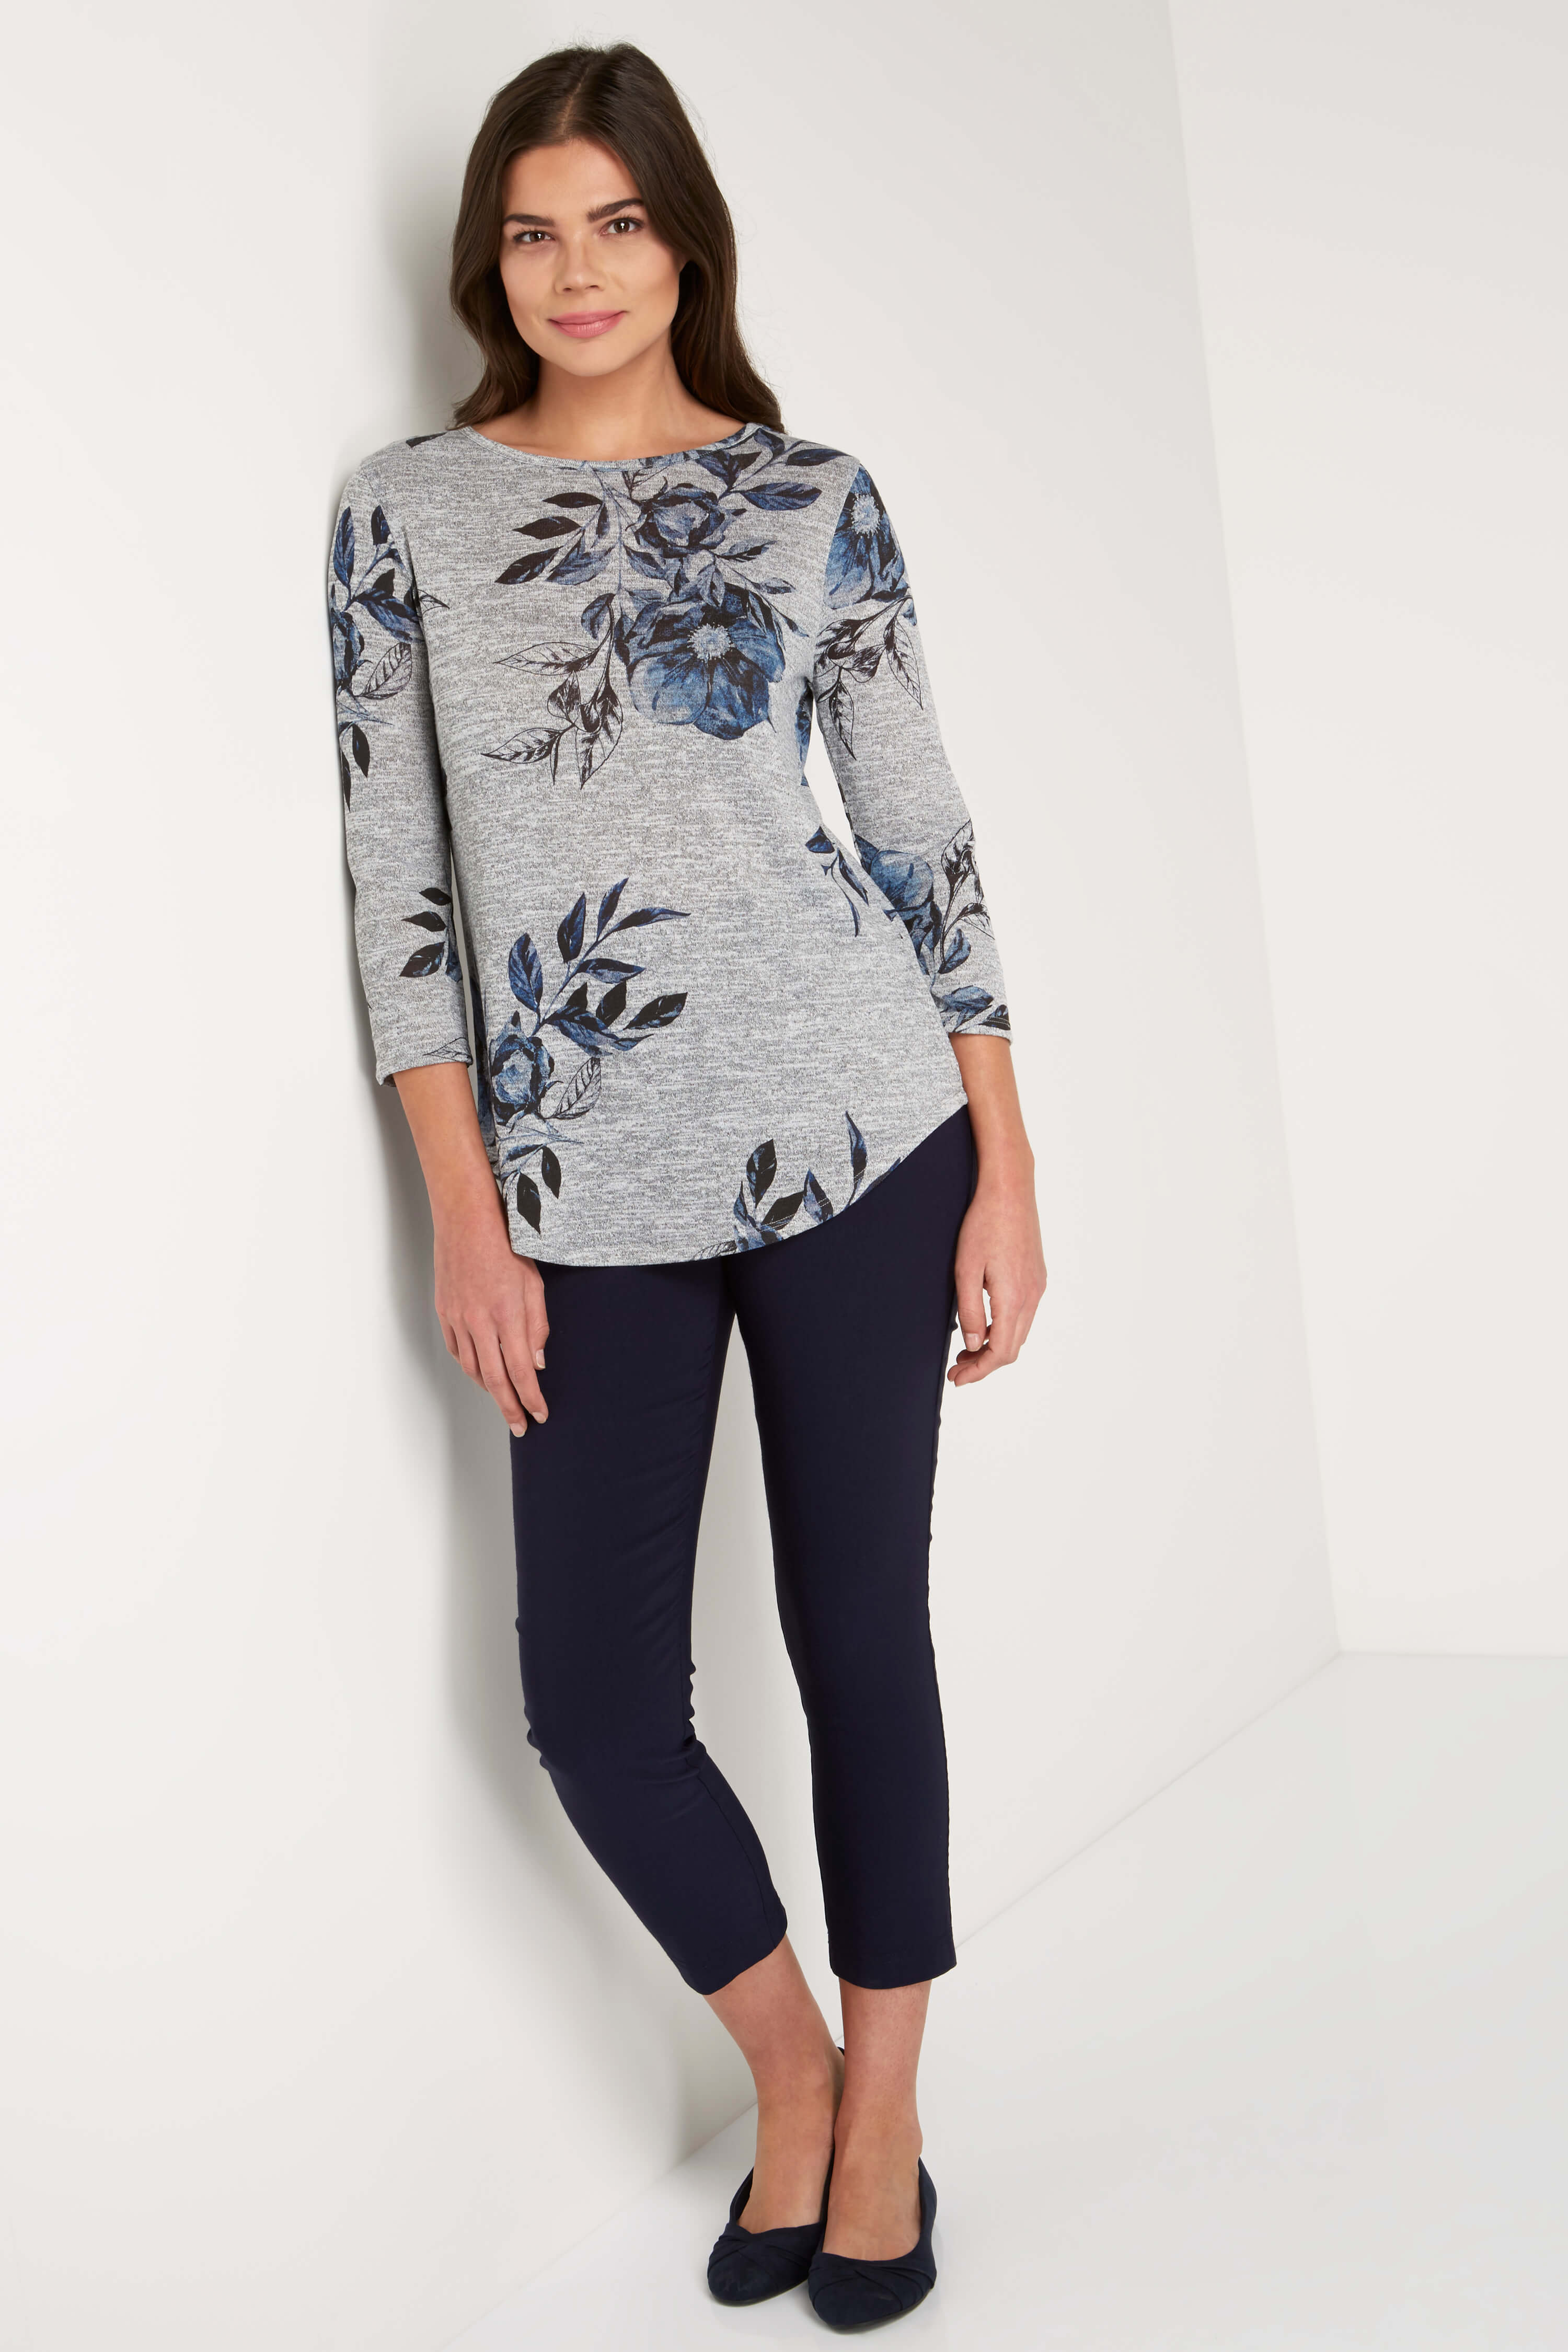 Floral Knitted Tunic Top in Grey - Roman Originals UK